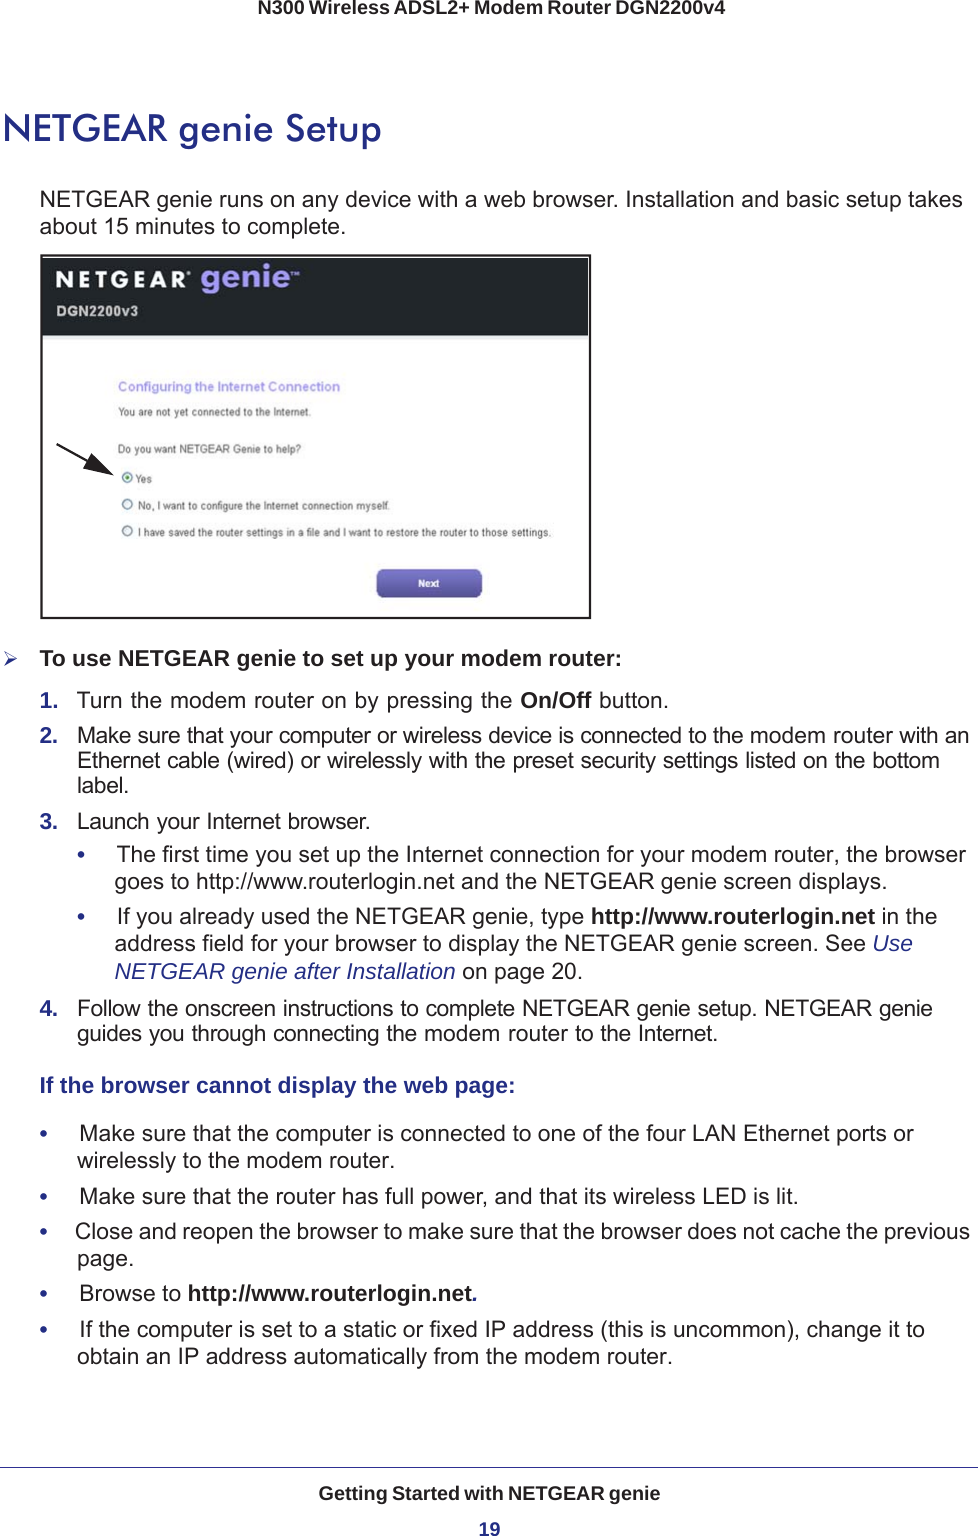 Getting Started with NETGEAR genie19 N300 Wireless ADSL2+ Modem Router DGN2200v4NETGEAR genie SetupNETGEAR genie runs on any device with a web browser. Installation and basic setup takes about 15  minutes to complete. To use NETGEAR genie to set up your modem router:1.  Turn the modem router on by pressing the On/Off button. 2.  Make sure that your computer or wireless device is connected to the modem router with an Ethernet cable (wired) or wirelessly with the preset security settings listed on the bottom label.3.  Launch your Internet browser.•     The first time you set up the Internet connection for your modem router, the browser goes to http://www.routerlogin.net and the NETGEAR genie screen displays.•     If you already used the NETGEAR genie, type http://www.routerlogin.net in the address field for your browser to display the NETGEAR genie screen. See Use NETGEAR genie after Installation on page  20.4.  Follow the onscreen instructions to complete NETGEAR genie setup. NETGEAR genie guides you through connecting the modem router to the Internet. If the browser cannot display the web page: •     Make sure that the computer is connected to one of the four LAN Ethernet ports or wirelessly to the modem router.•     Make sure that the router has full power, and that its wireless LED is lit.•     Close and reopen the browser to make sure that the browser does not cache the previous page.•     Browse to http://www.routerlogin.net.•     If the computer is set to a static or fixed IP address (this is uncommon), change it to obtain an IP address automatically from the modem router.